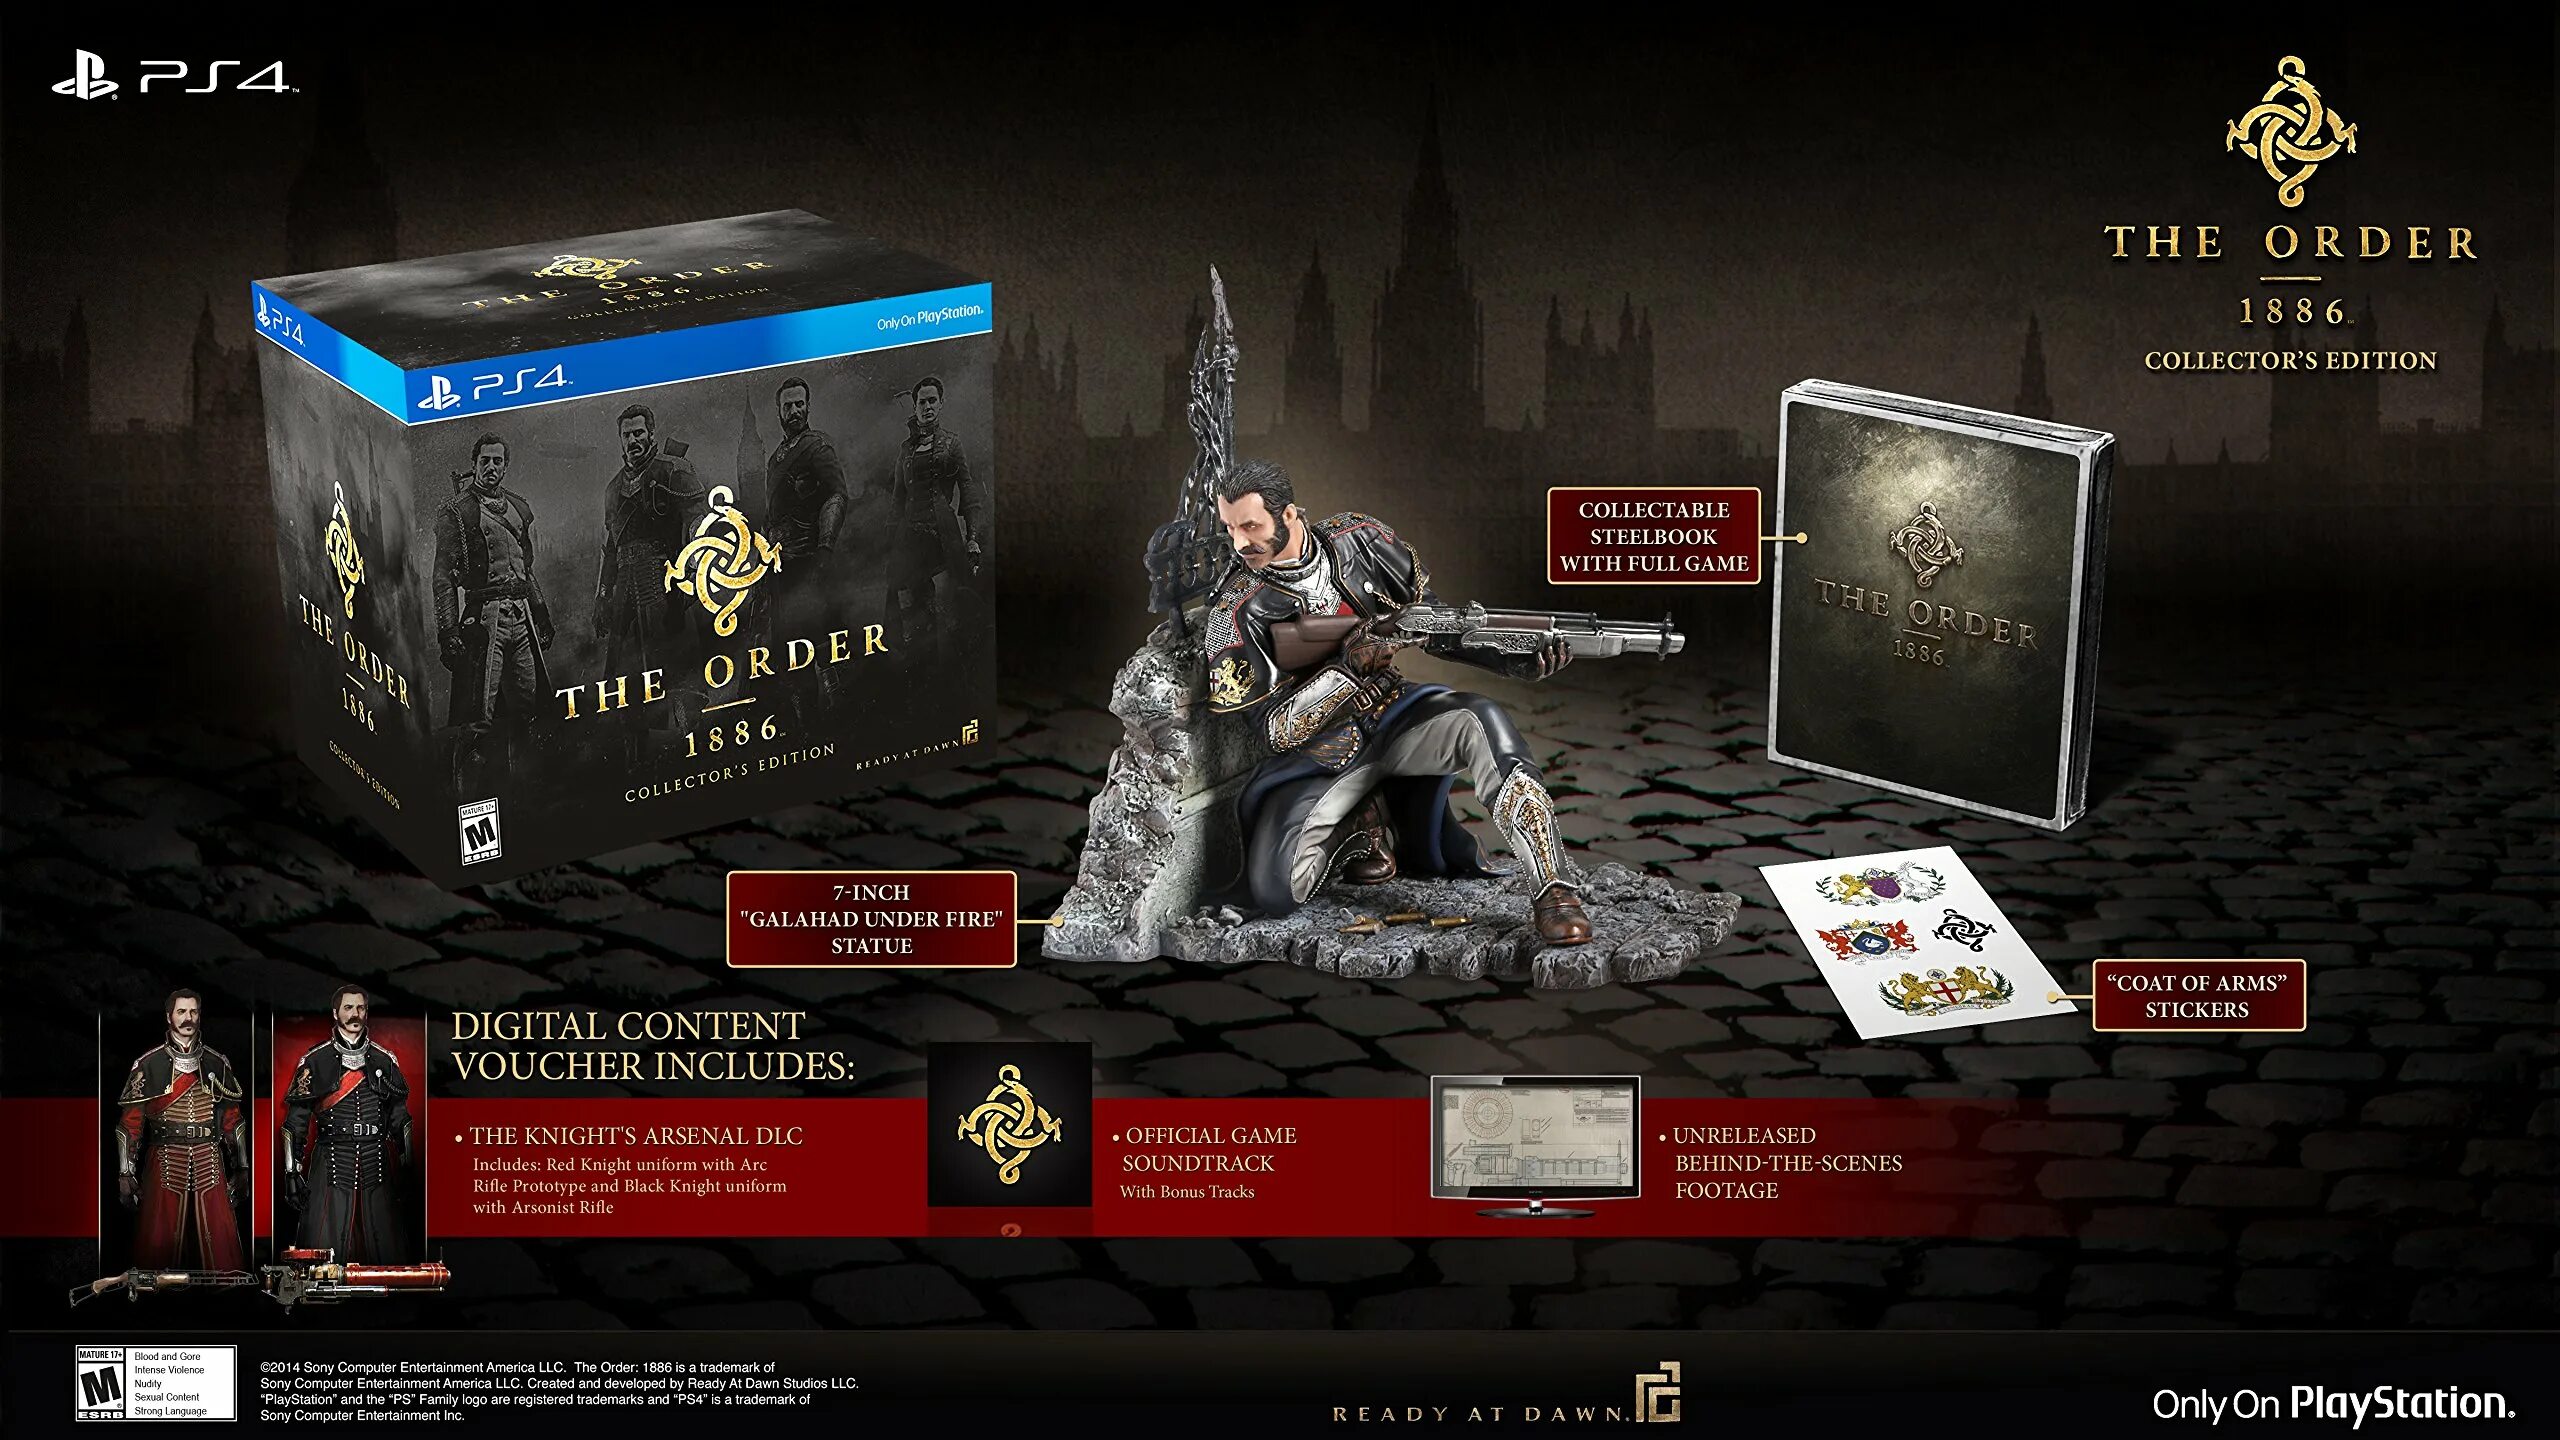 Игра order 1886. Order 1886 коллекционное издание. Order 1886 ps4. Коллекционка the order. S edition games